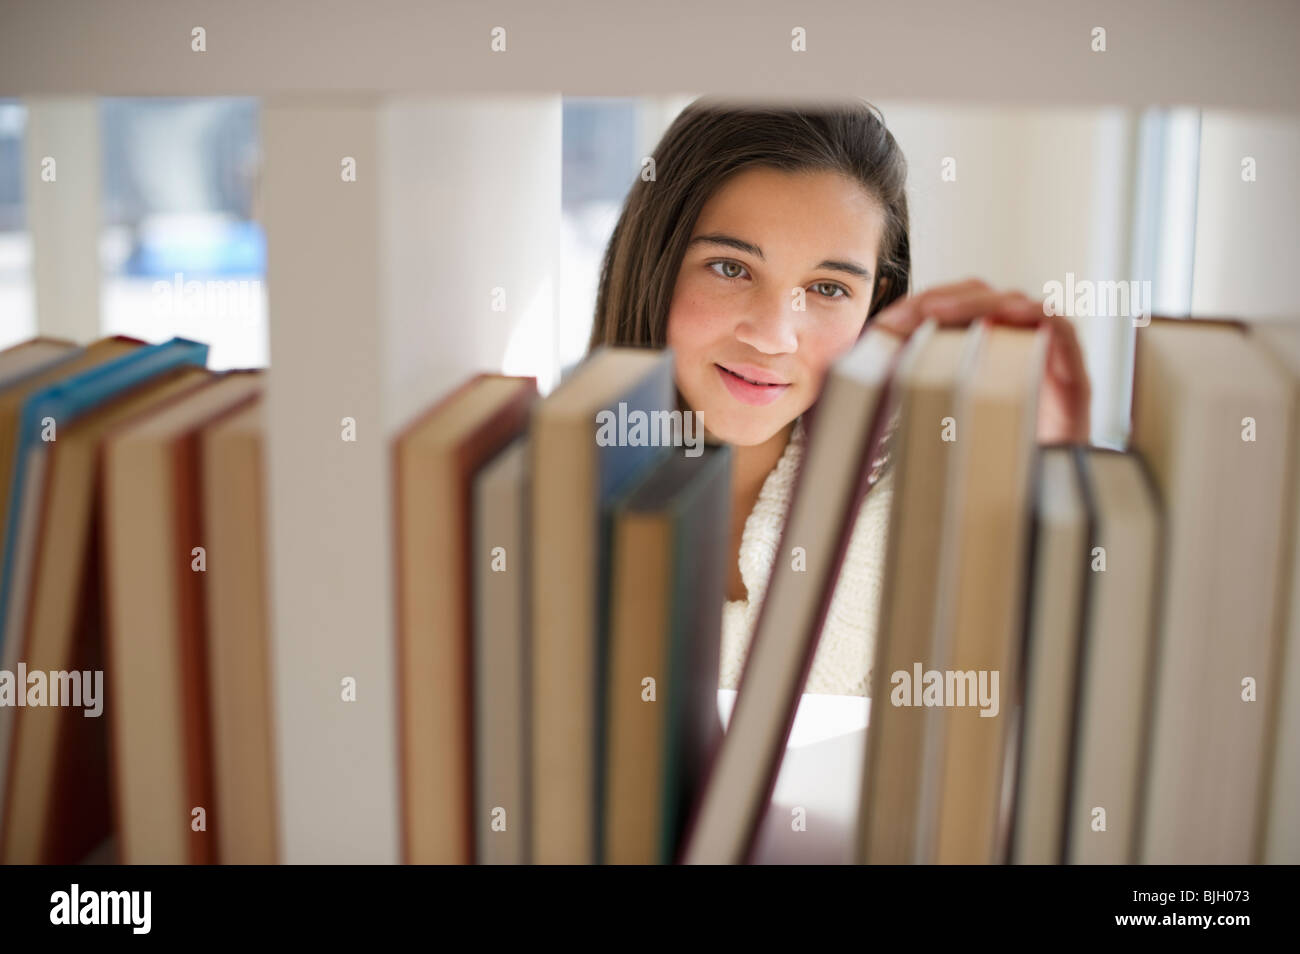 Student selecting book Stock Photo